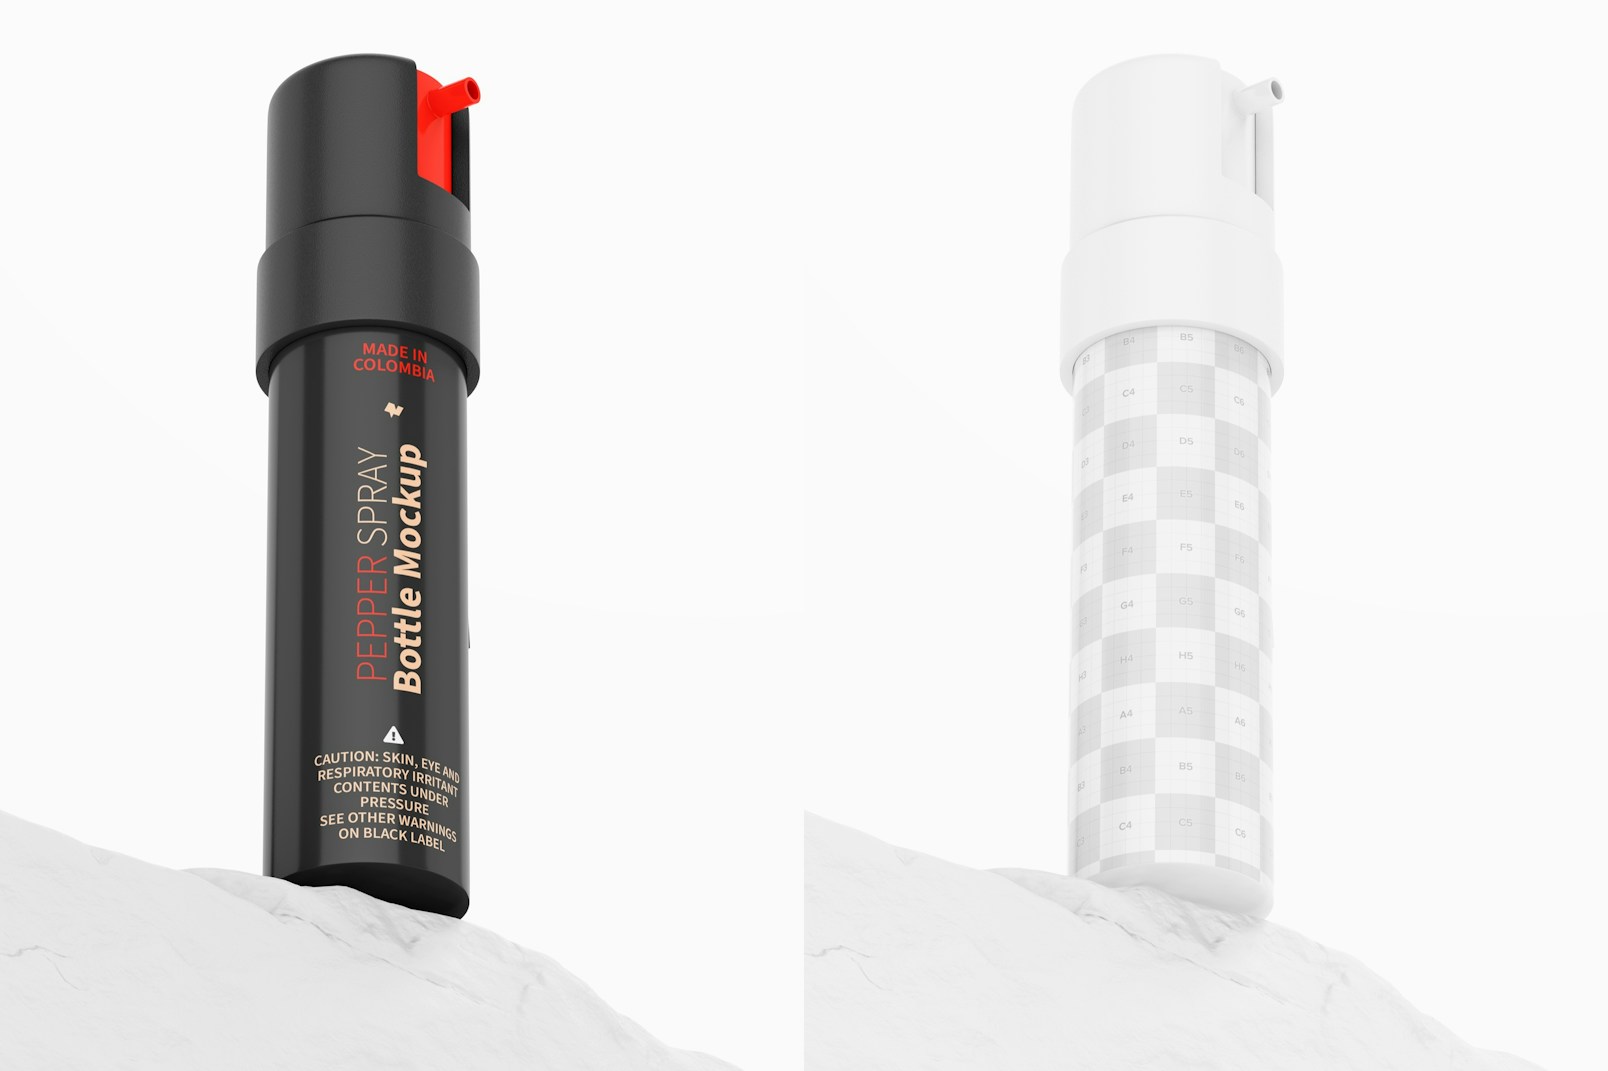 Pepper Spray Bottle Mockup, Low Angle View